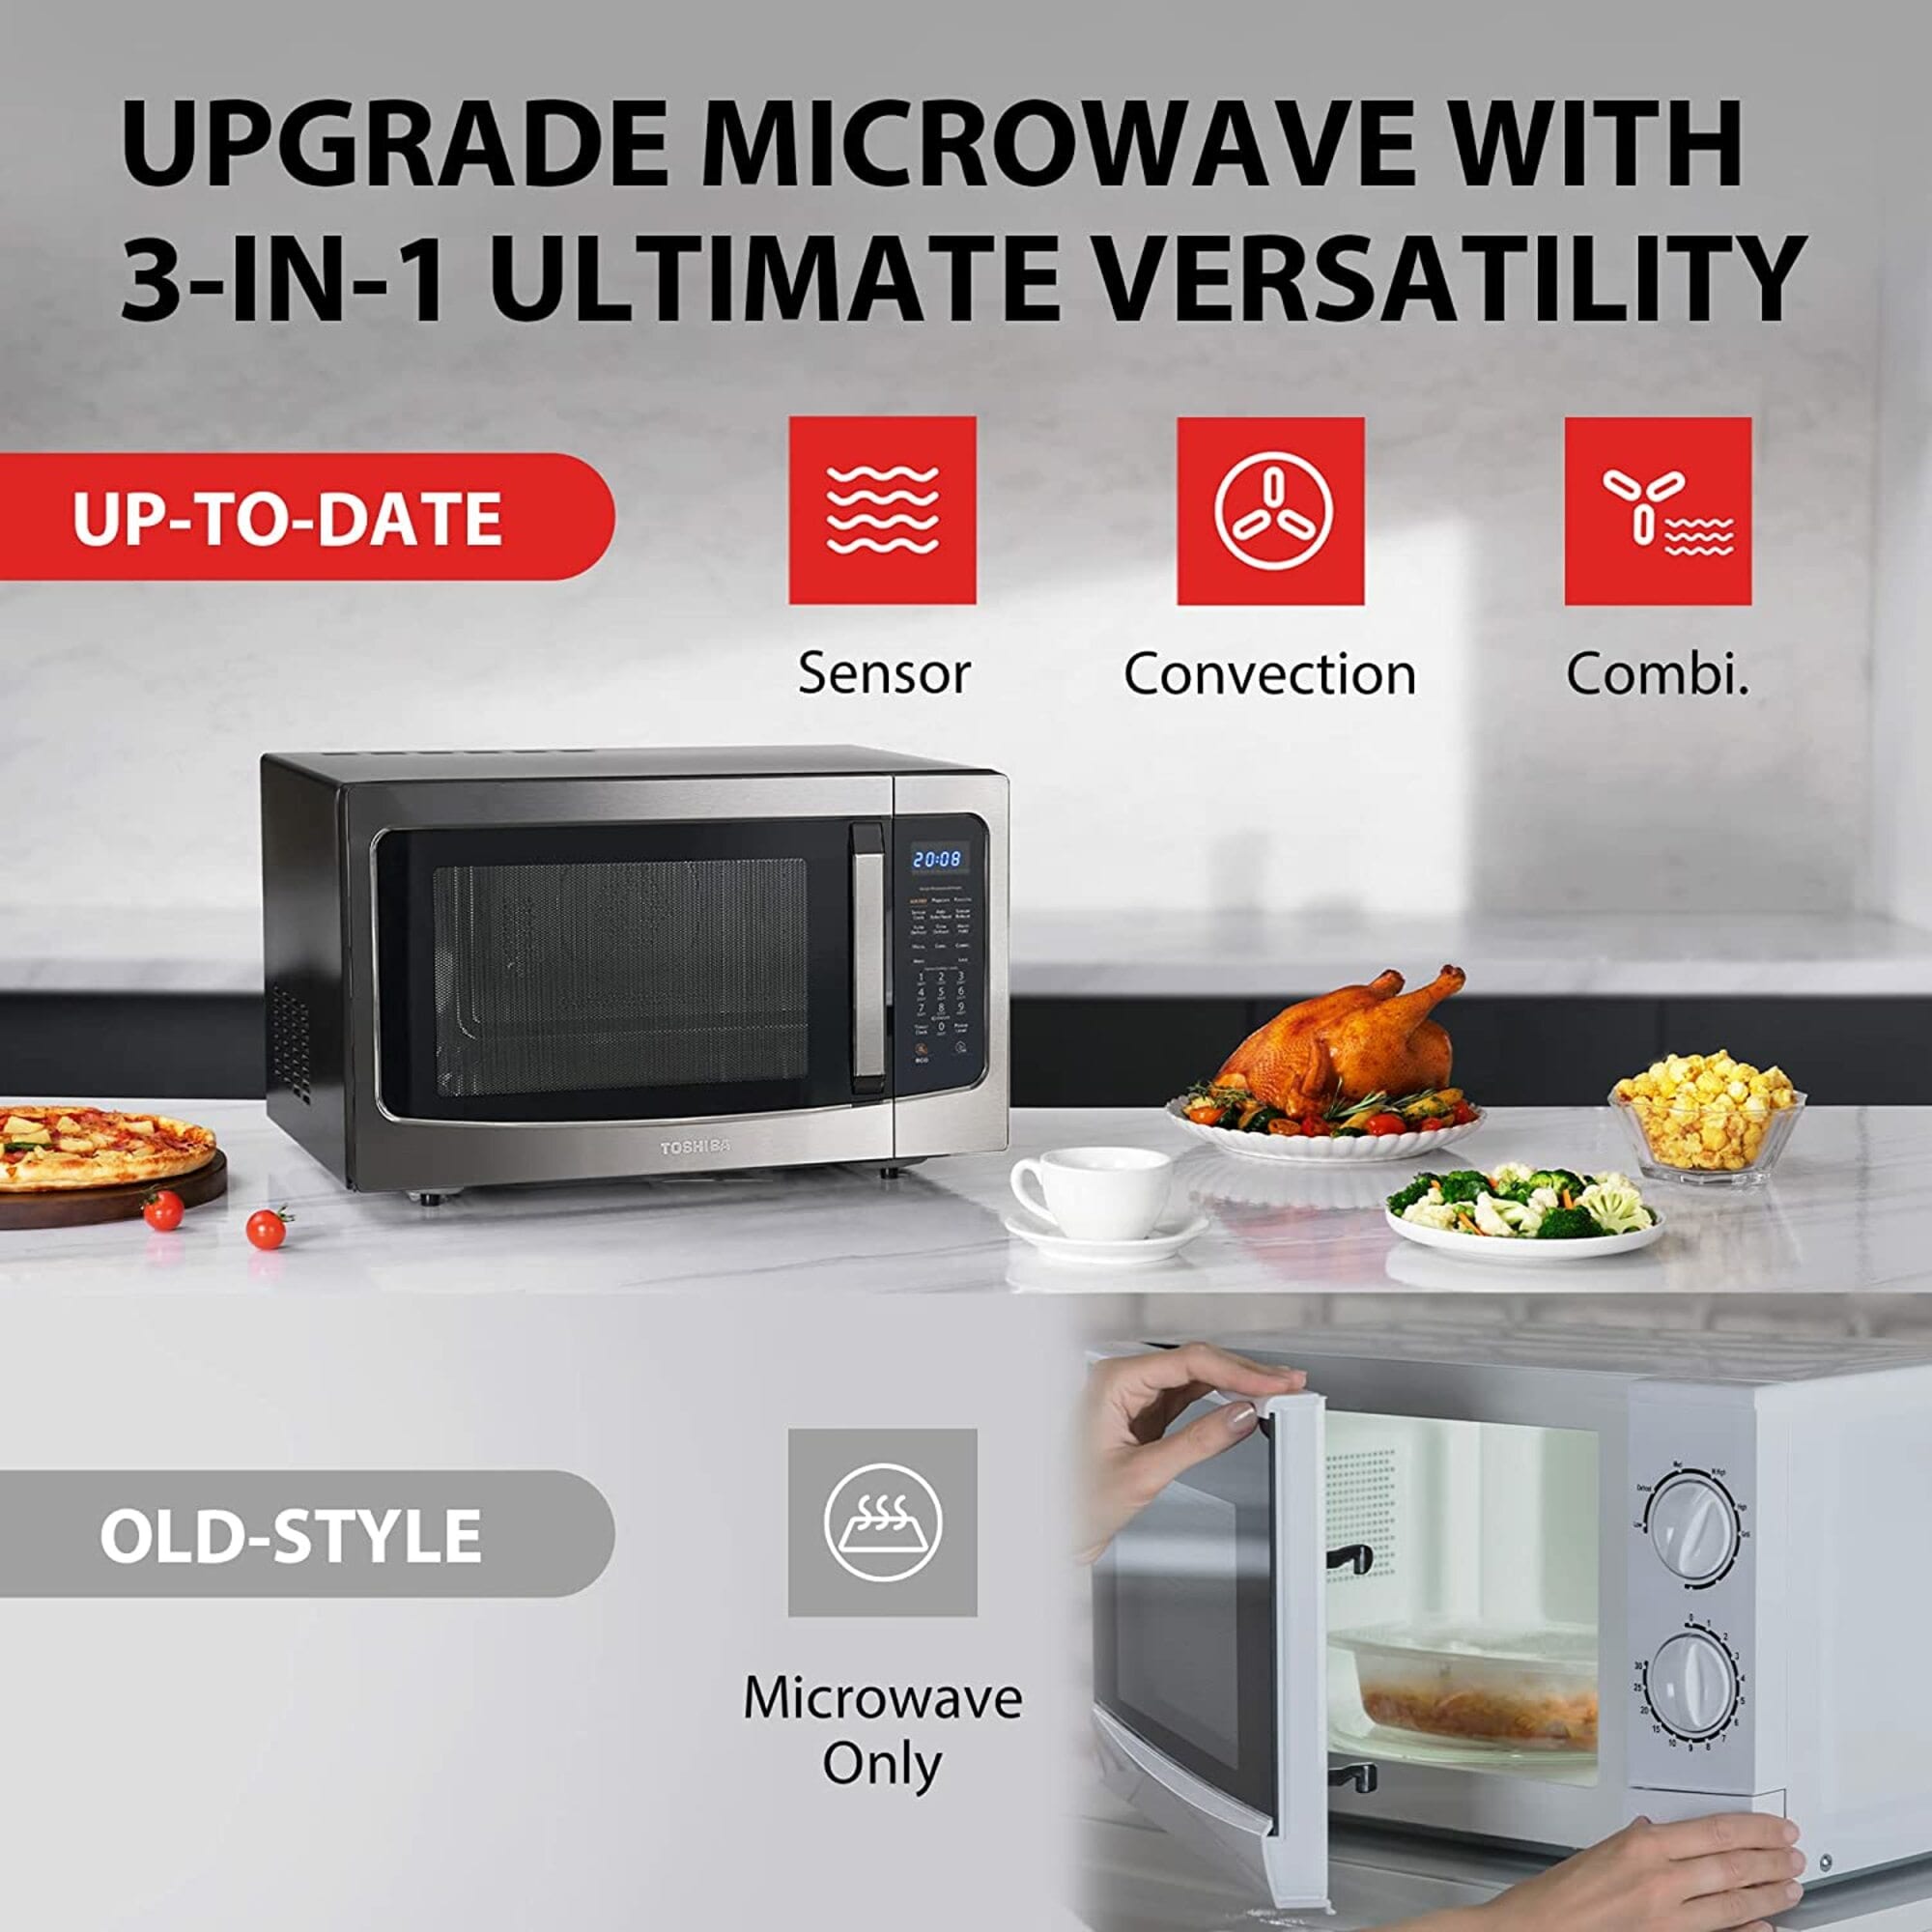 Toshiba 1.5 Cu. ft. Stainless Steel Microwave with Air Fryer